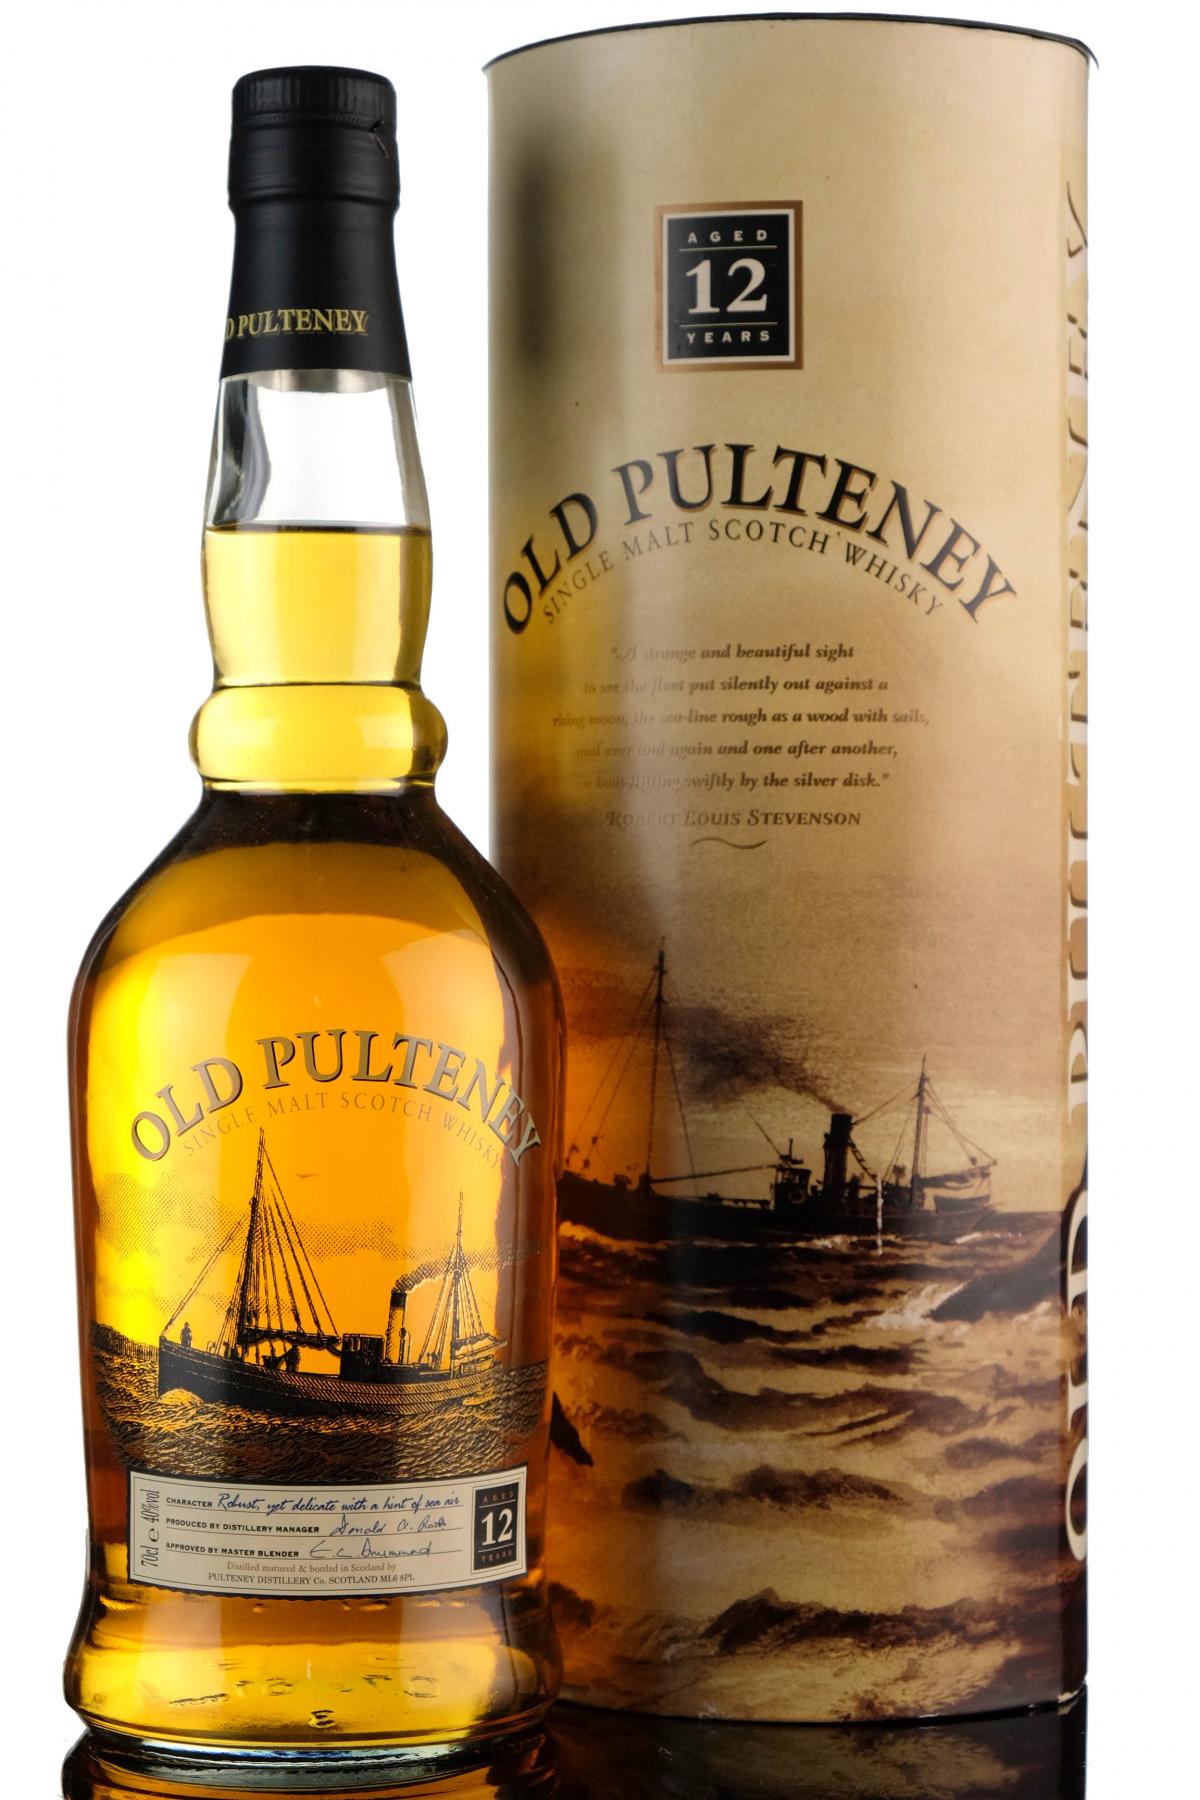 Old Pulteney 12 Year Old - Circa 2000